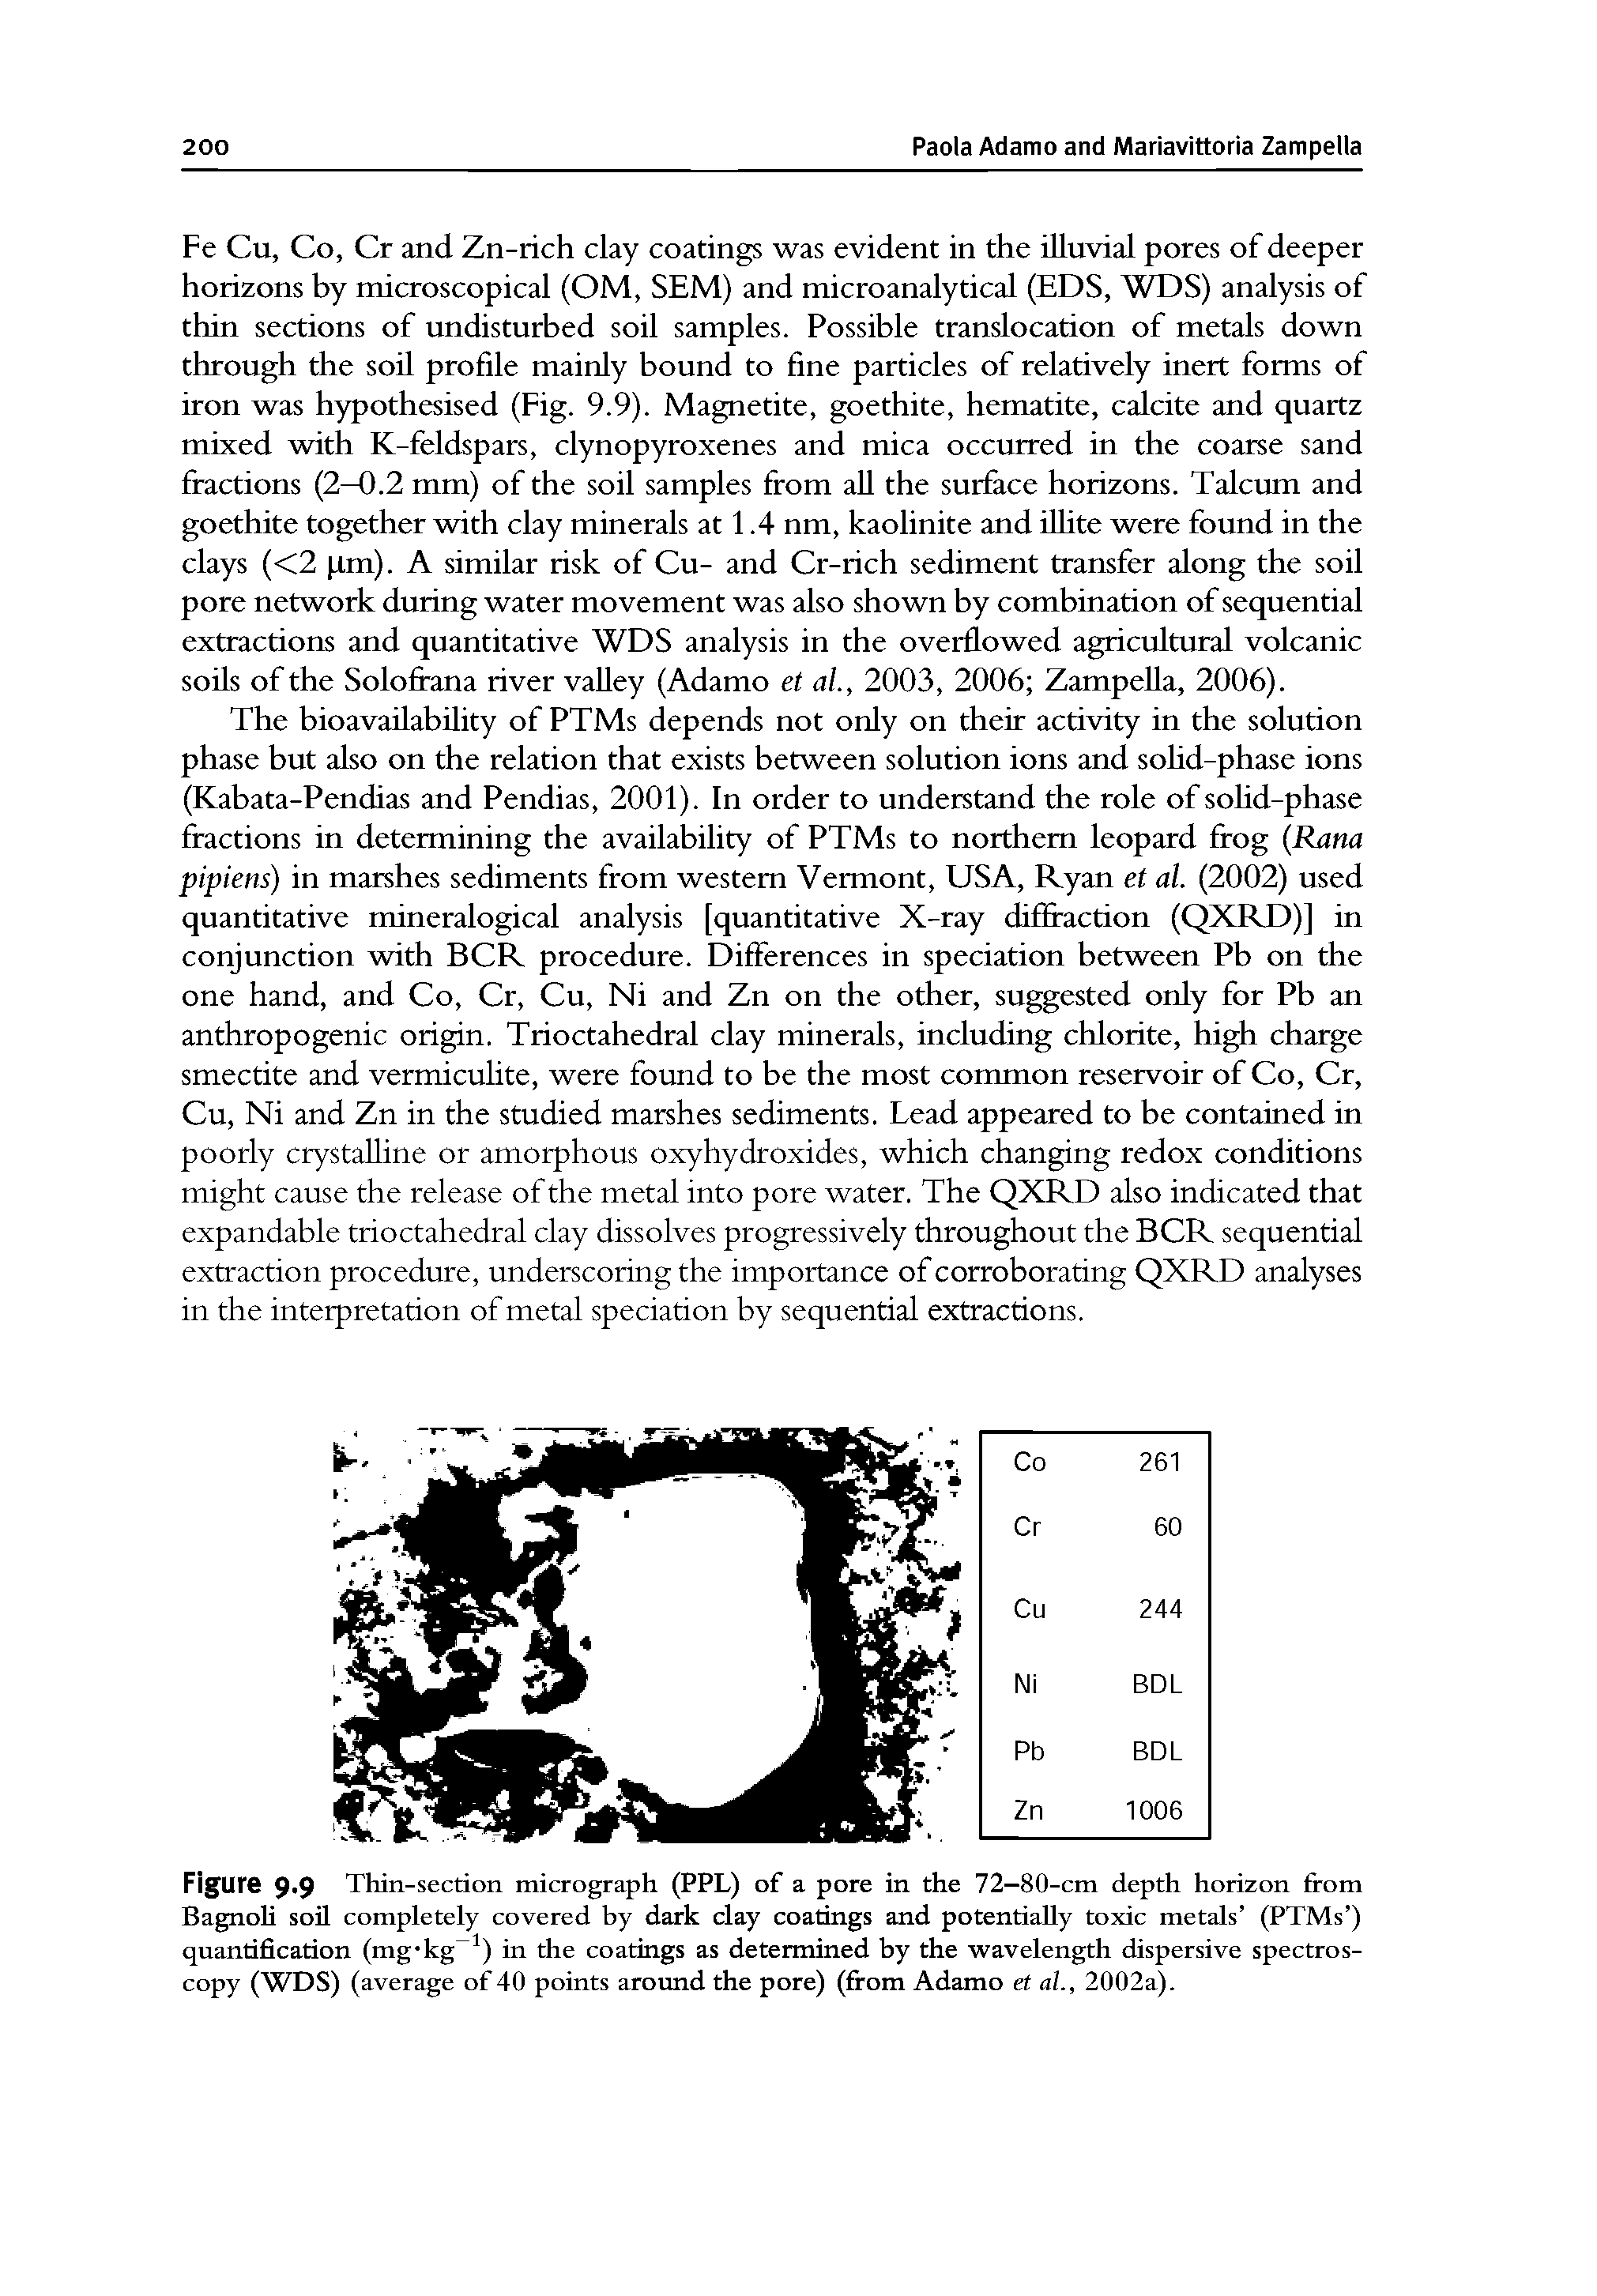 Figure 9.9 Thin-section micrograph (PPL) of a pore in the 72-80-cm depth horizon from Bagnoli soil completely covered by dark clay coatings and potentially toxic metals (PTMs j quantification (mg kg ) in the coatings as determined by the wavelength dispersive spectroscopy (WDS) (average of 40 points around the pore) (from Adamo et al., 2002a).